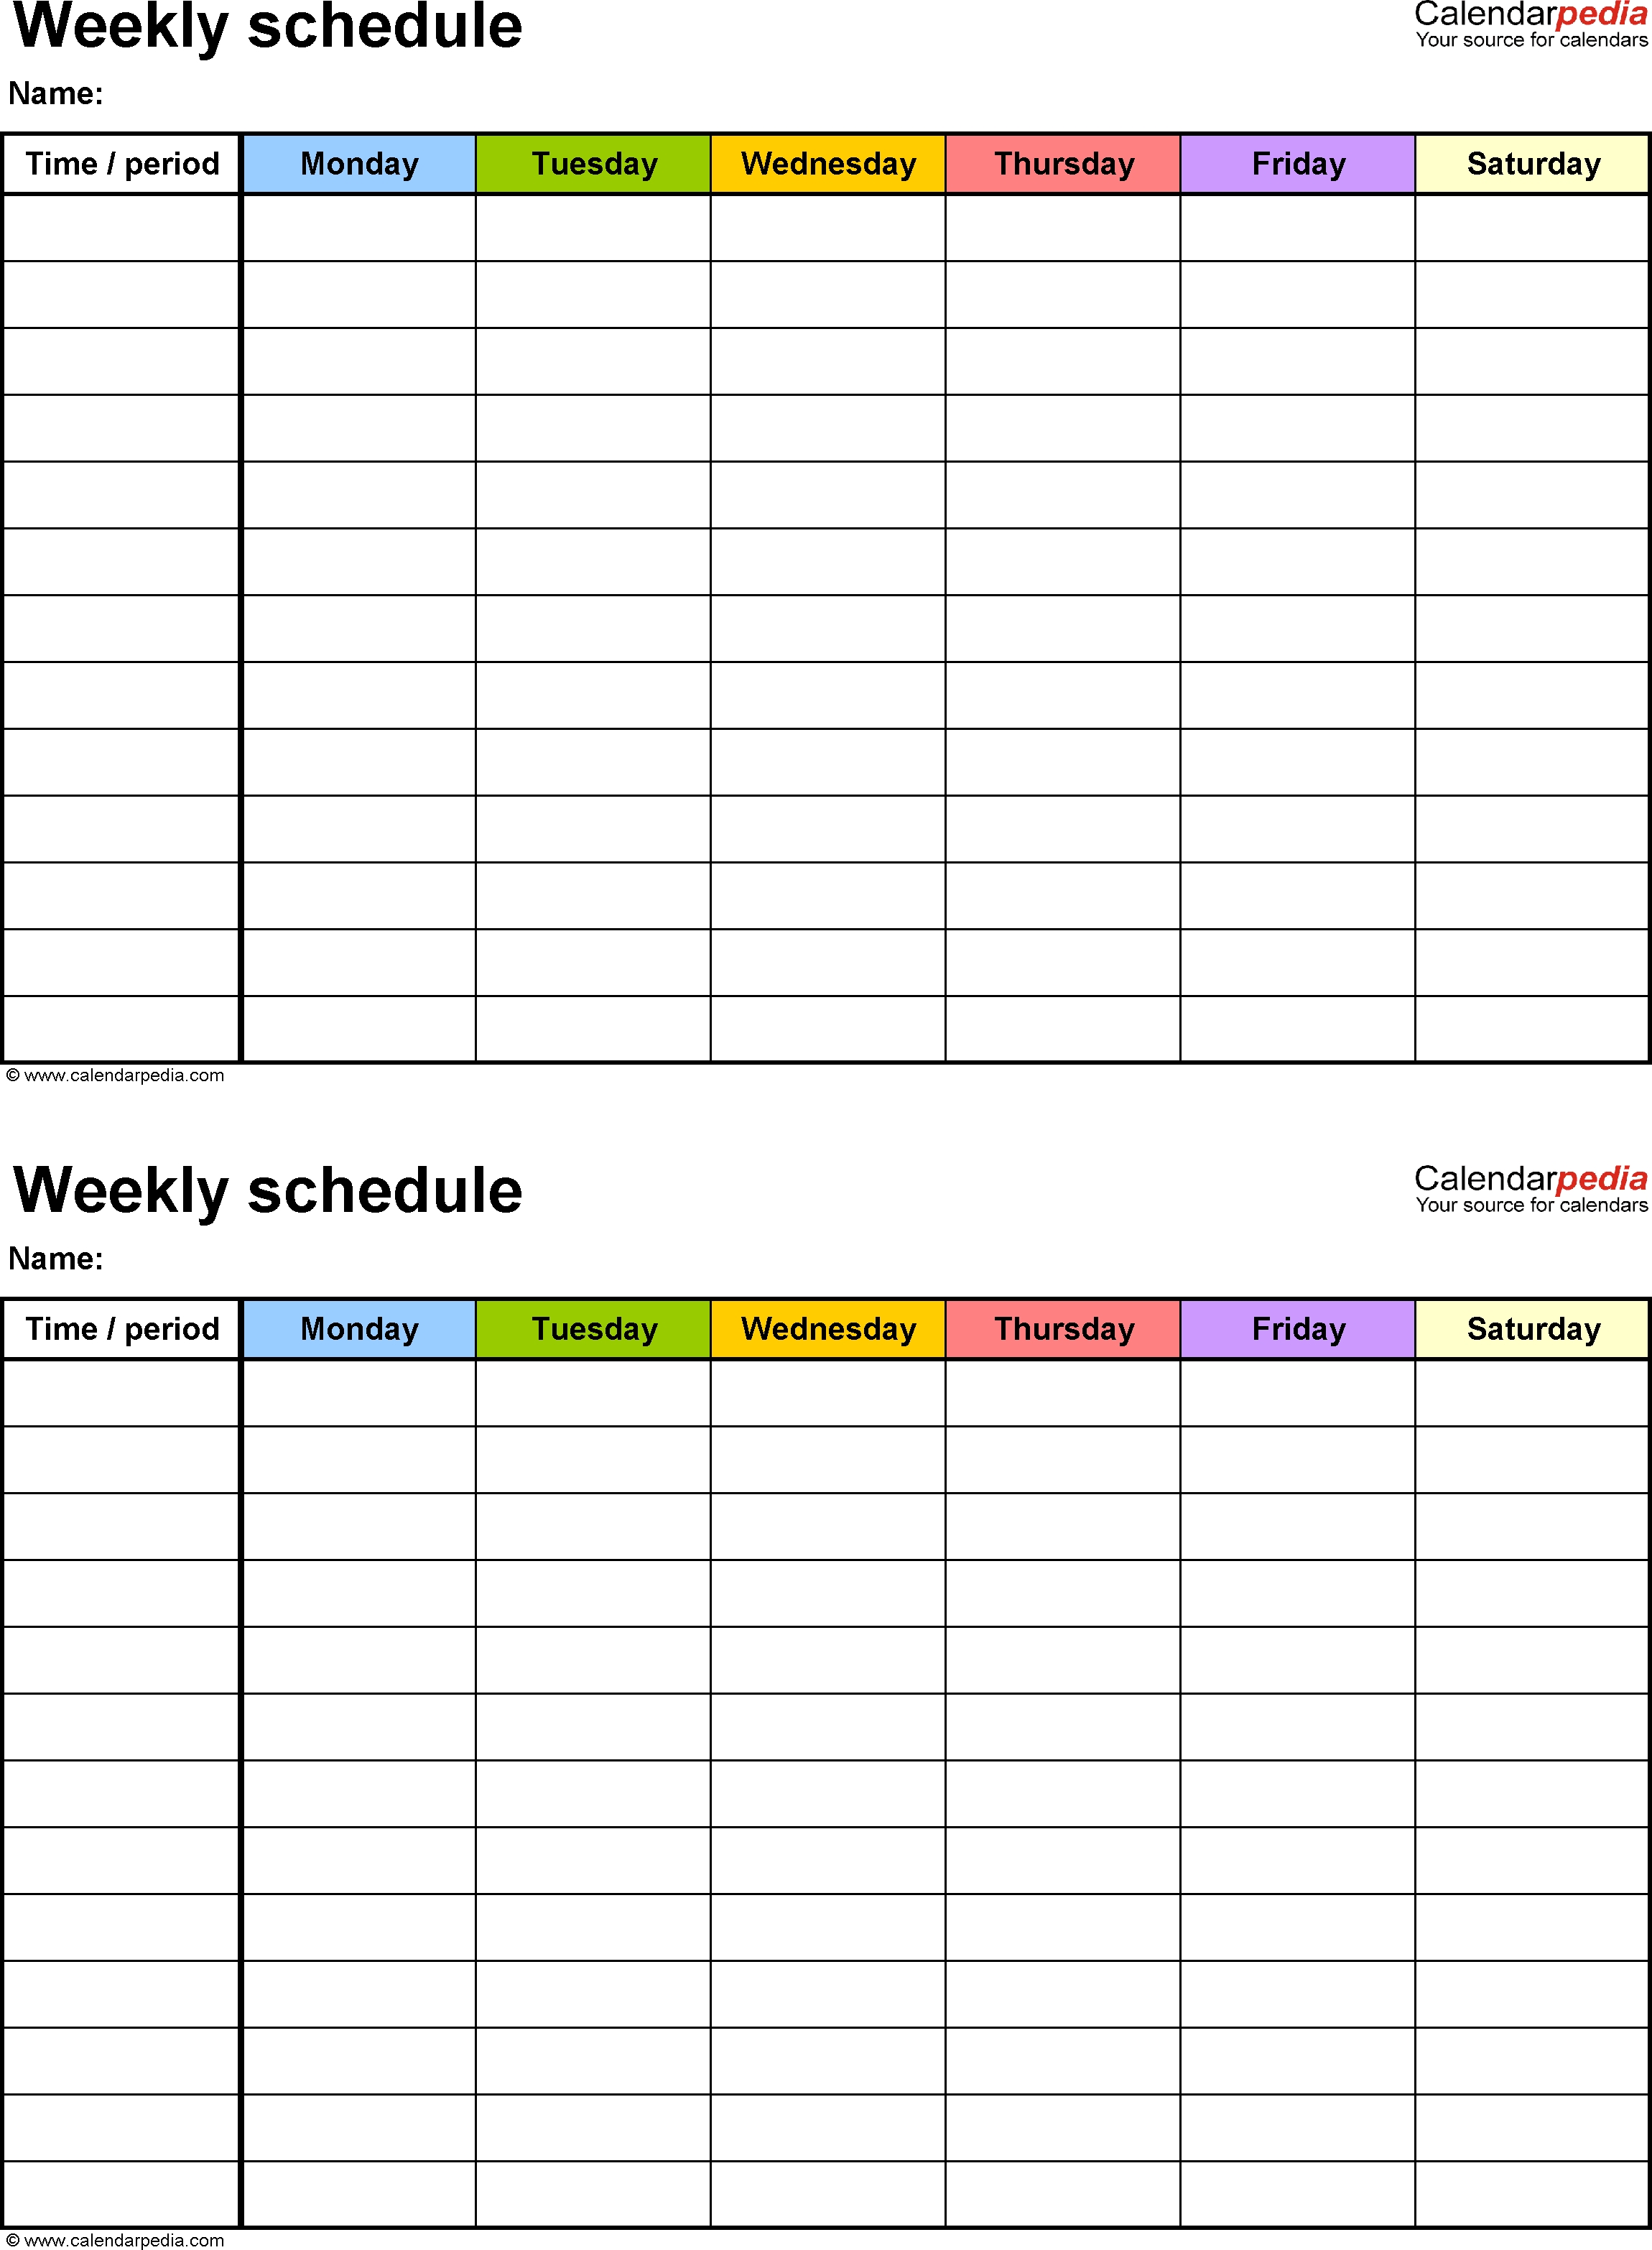 Free Weekly Schedule Templates For Word - 18 Templates inside Two Week Calendar Template Free